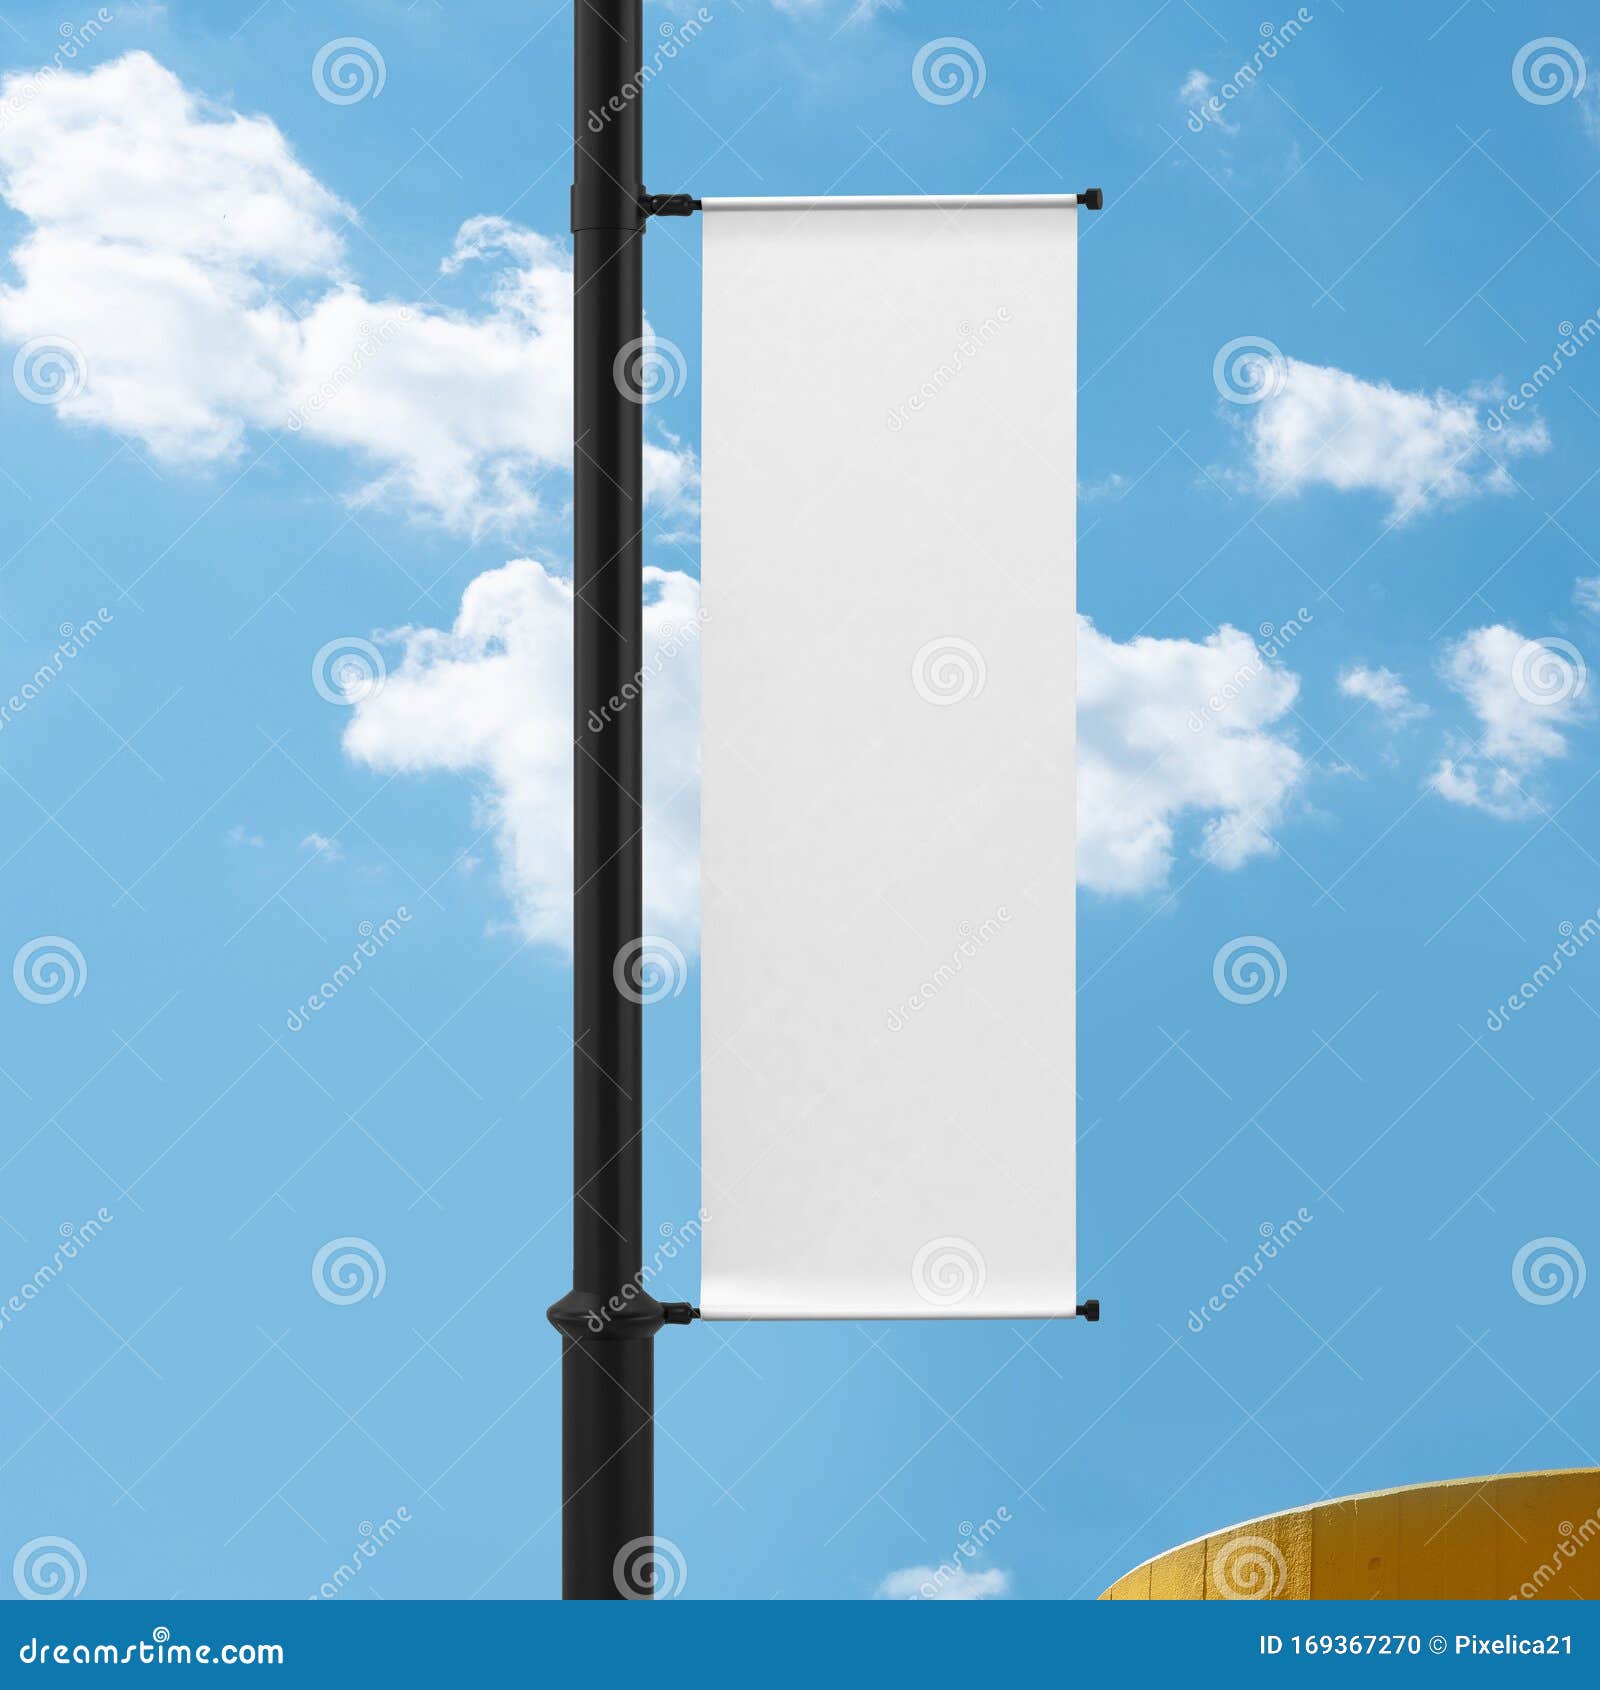 white lamp post banner mockup, blank advertisment 3d rendering with blue sky background